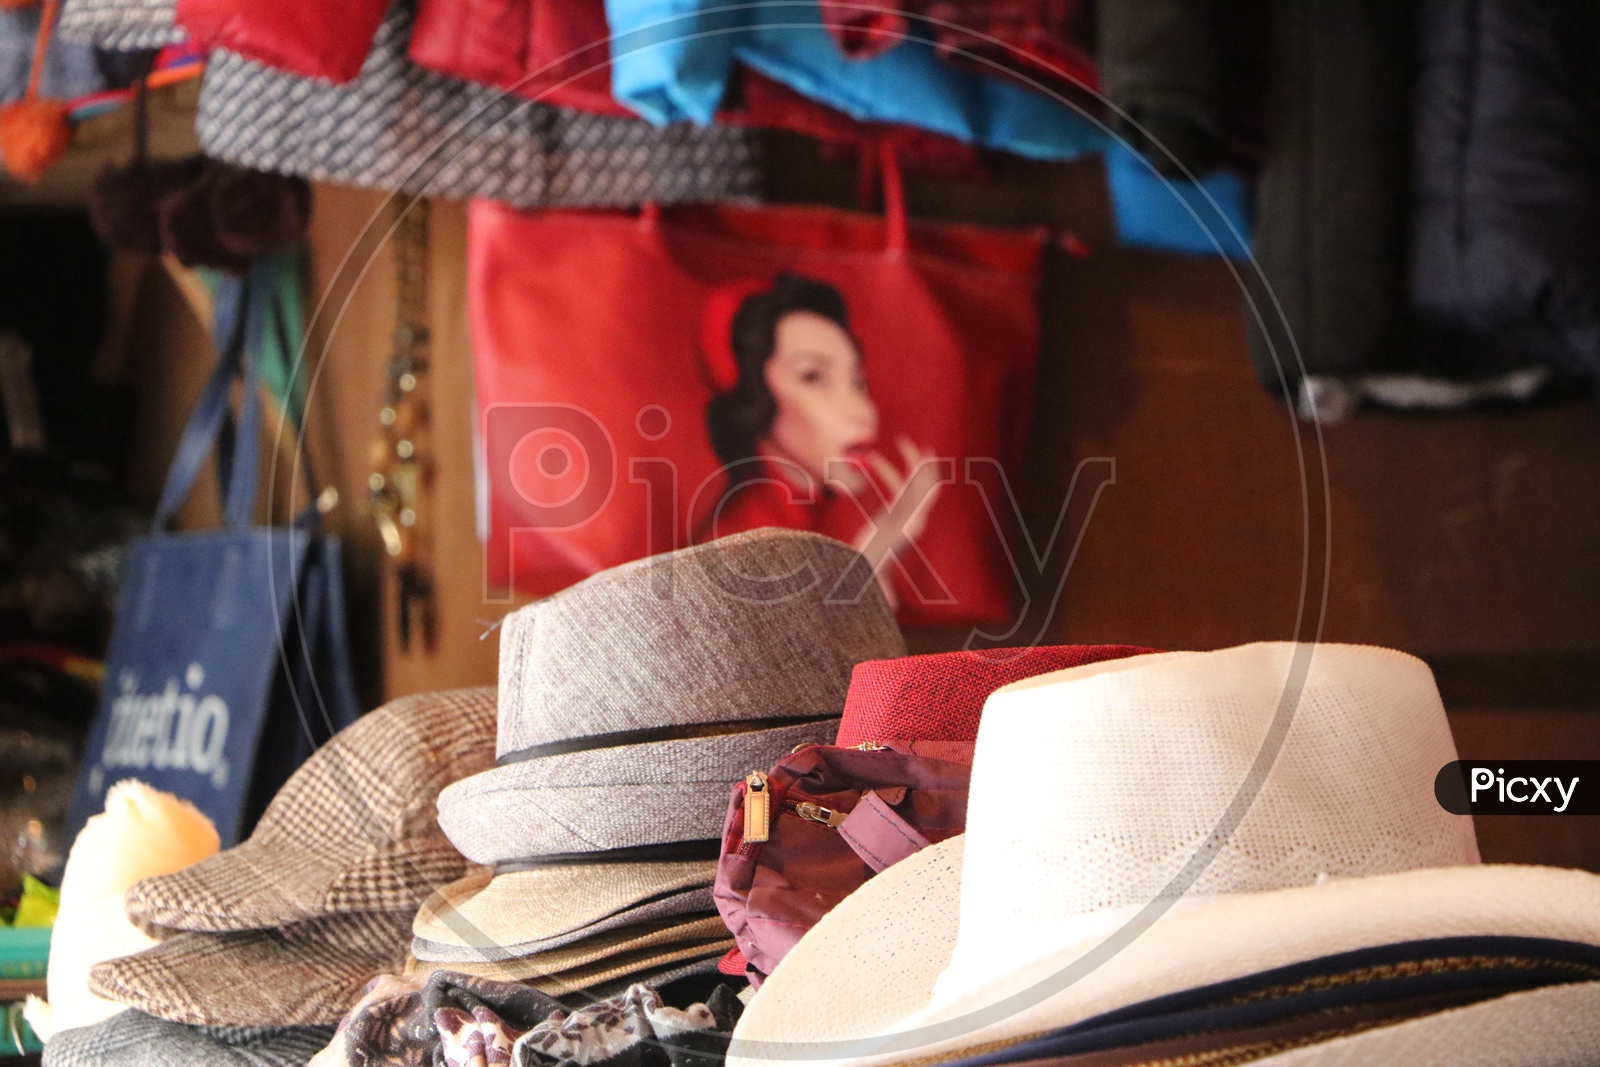 hats in a shop